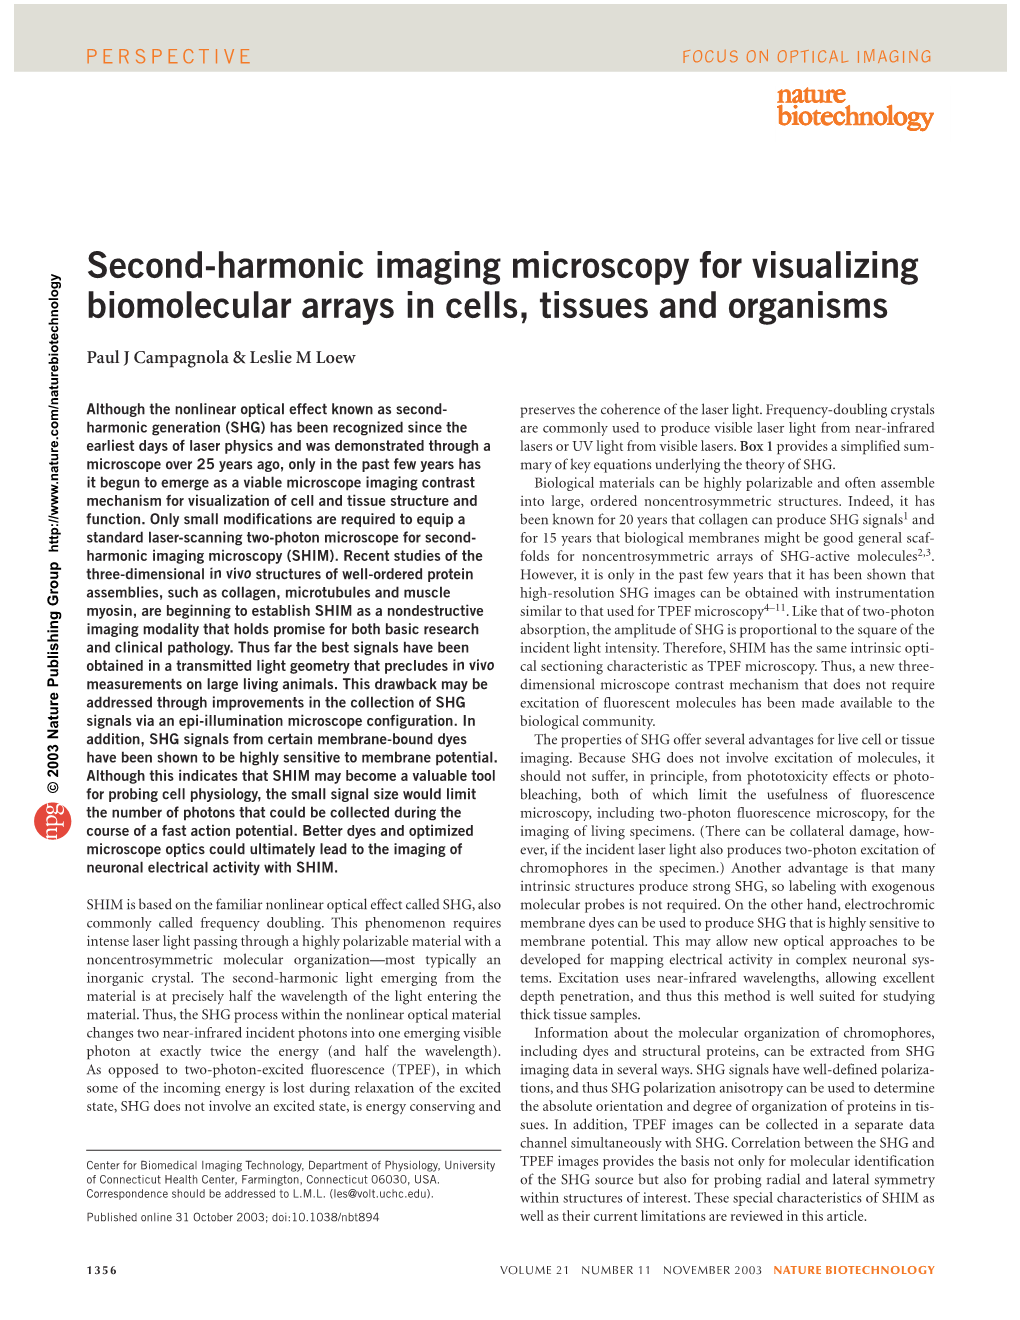 Second-Harmonic Imaging Microscopy for Visualizing Biomolecular Arrays in Cells, Tissues and Organisms